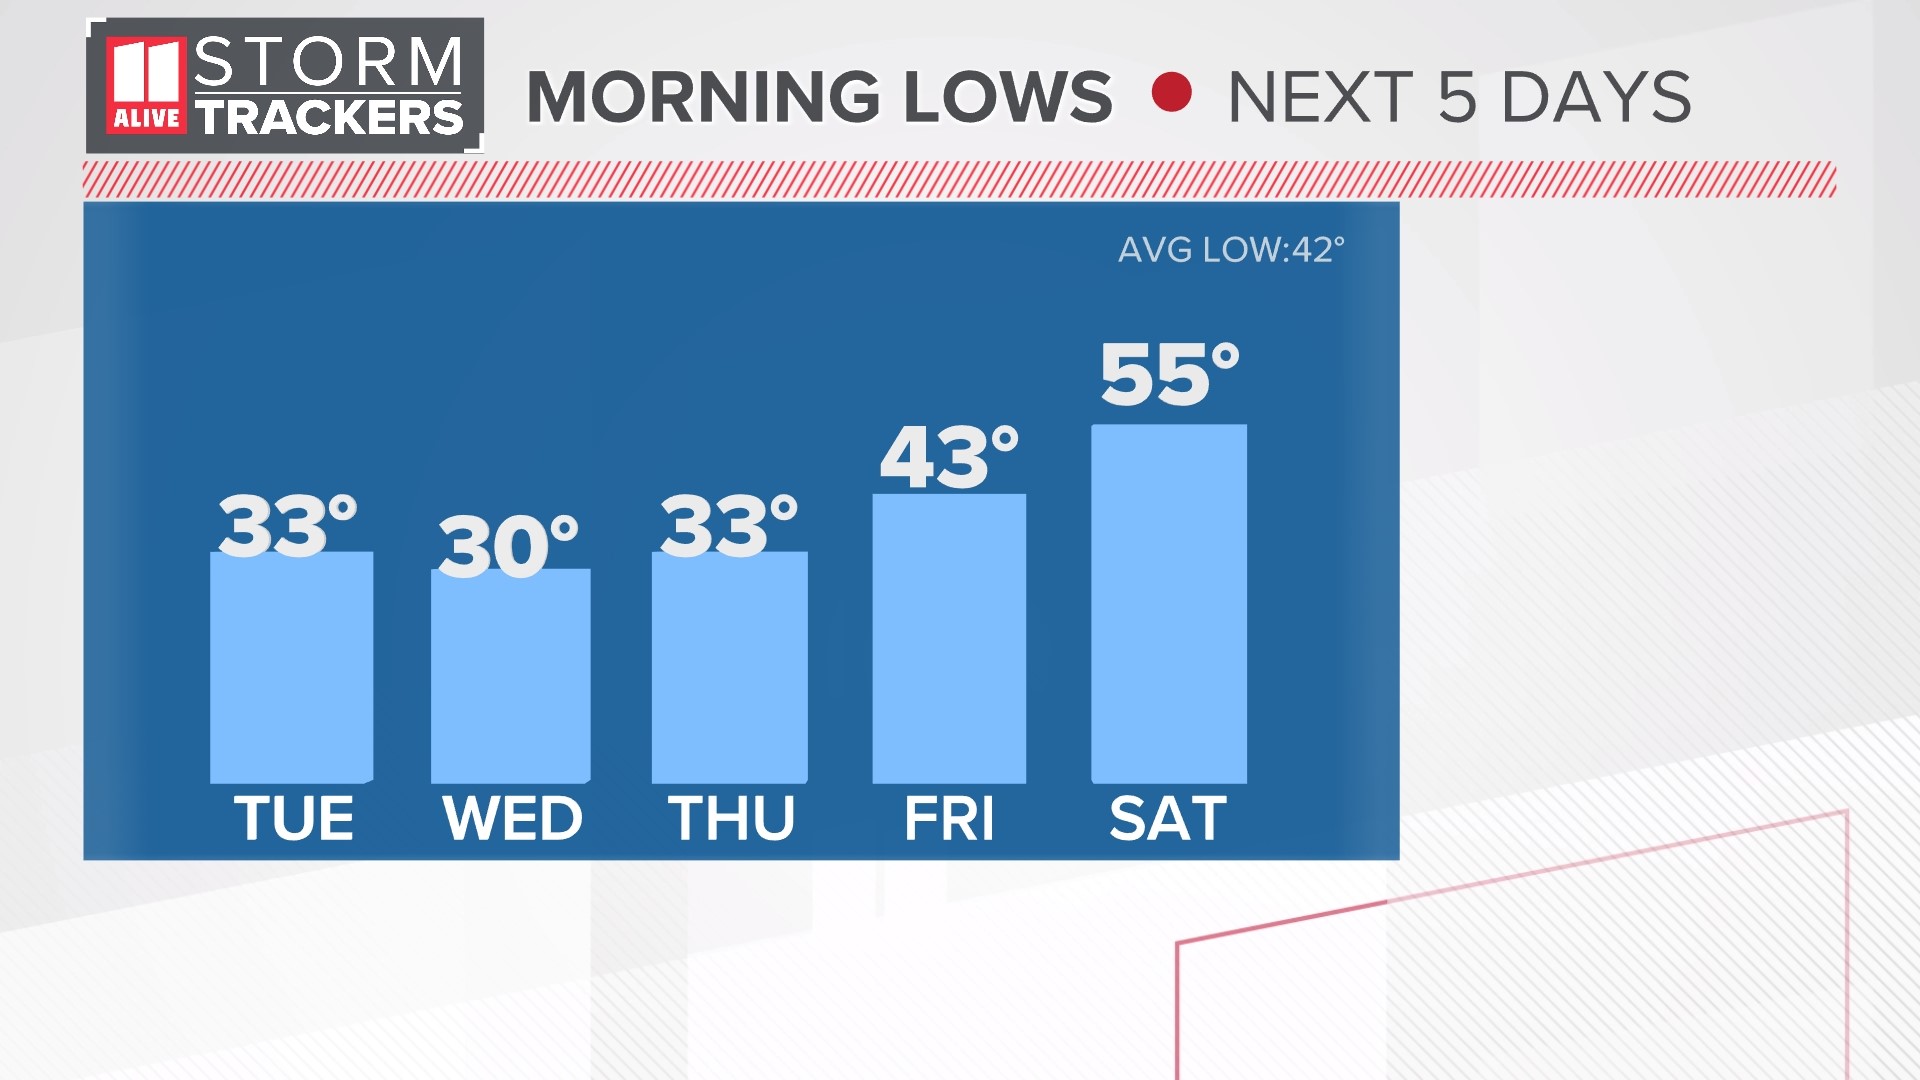 Temperatures flirting with freezing Tue/Wed AM